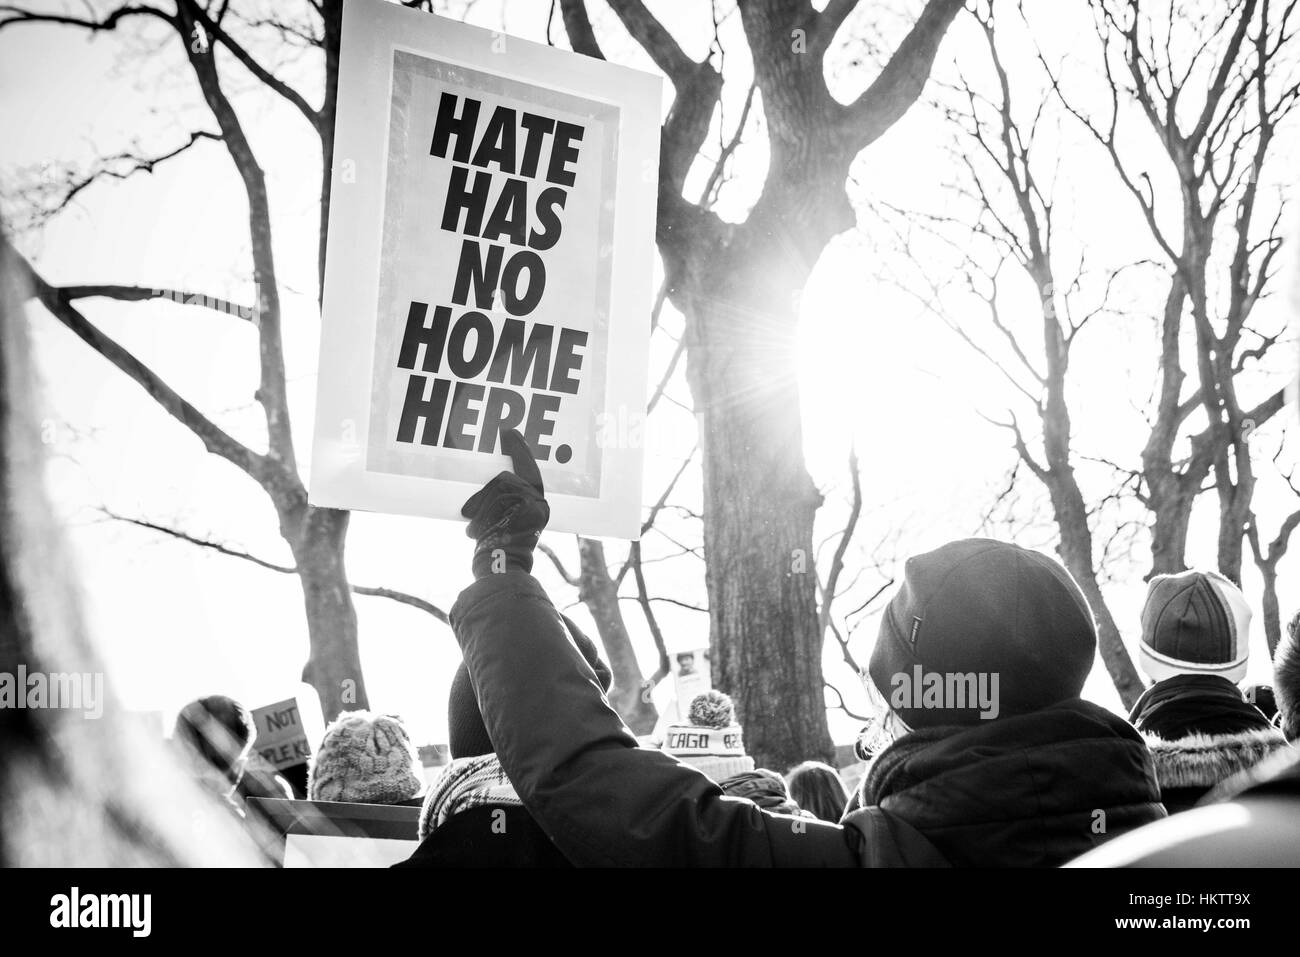 New York City, USA. 29th Jan, 2017. Protestors and marches at a rally to support immigrants and express outrage in the wake of President Donald Trump's ban on immigrants and Muslims to the United States. The march started wwith a rally in Battery Park, near the Statue of Liberty and marched uptown with thousands of people. Credit: Brigette Supernova/Alamy Live News Stock Photo